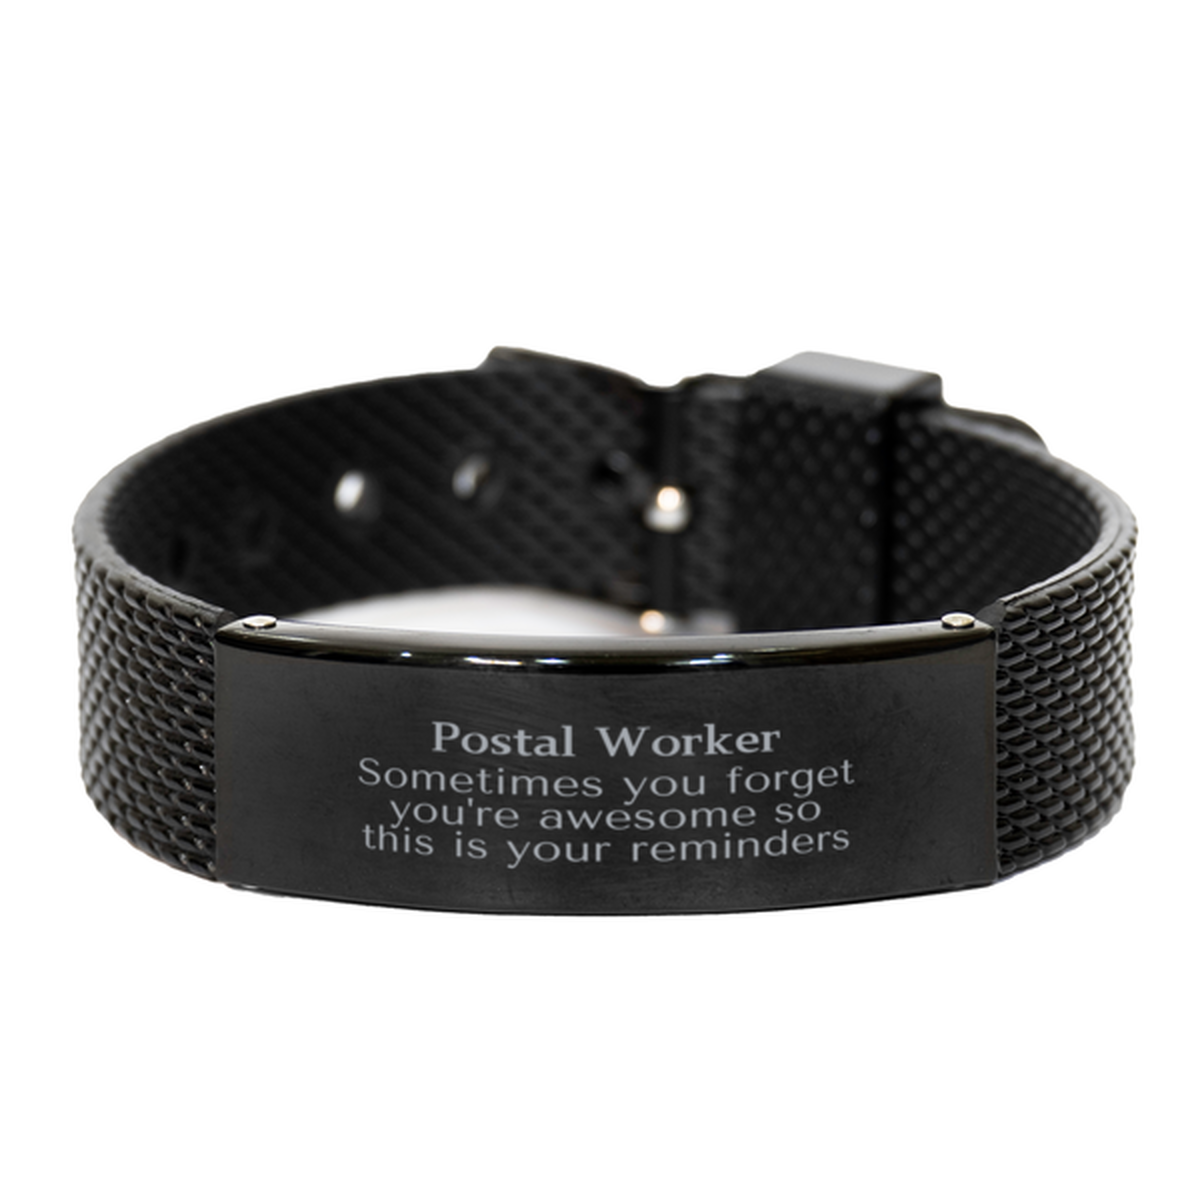 Sentimental Postal Worker Black Shark Mesh Bracelet, Postal Worker Sometimes you forget you're awesome so this is your reminders, Graduation Christmas Birthday Gifts for Postal Worker, Men, Women, Coworkers